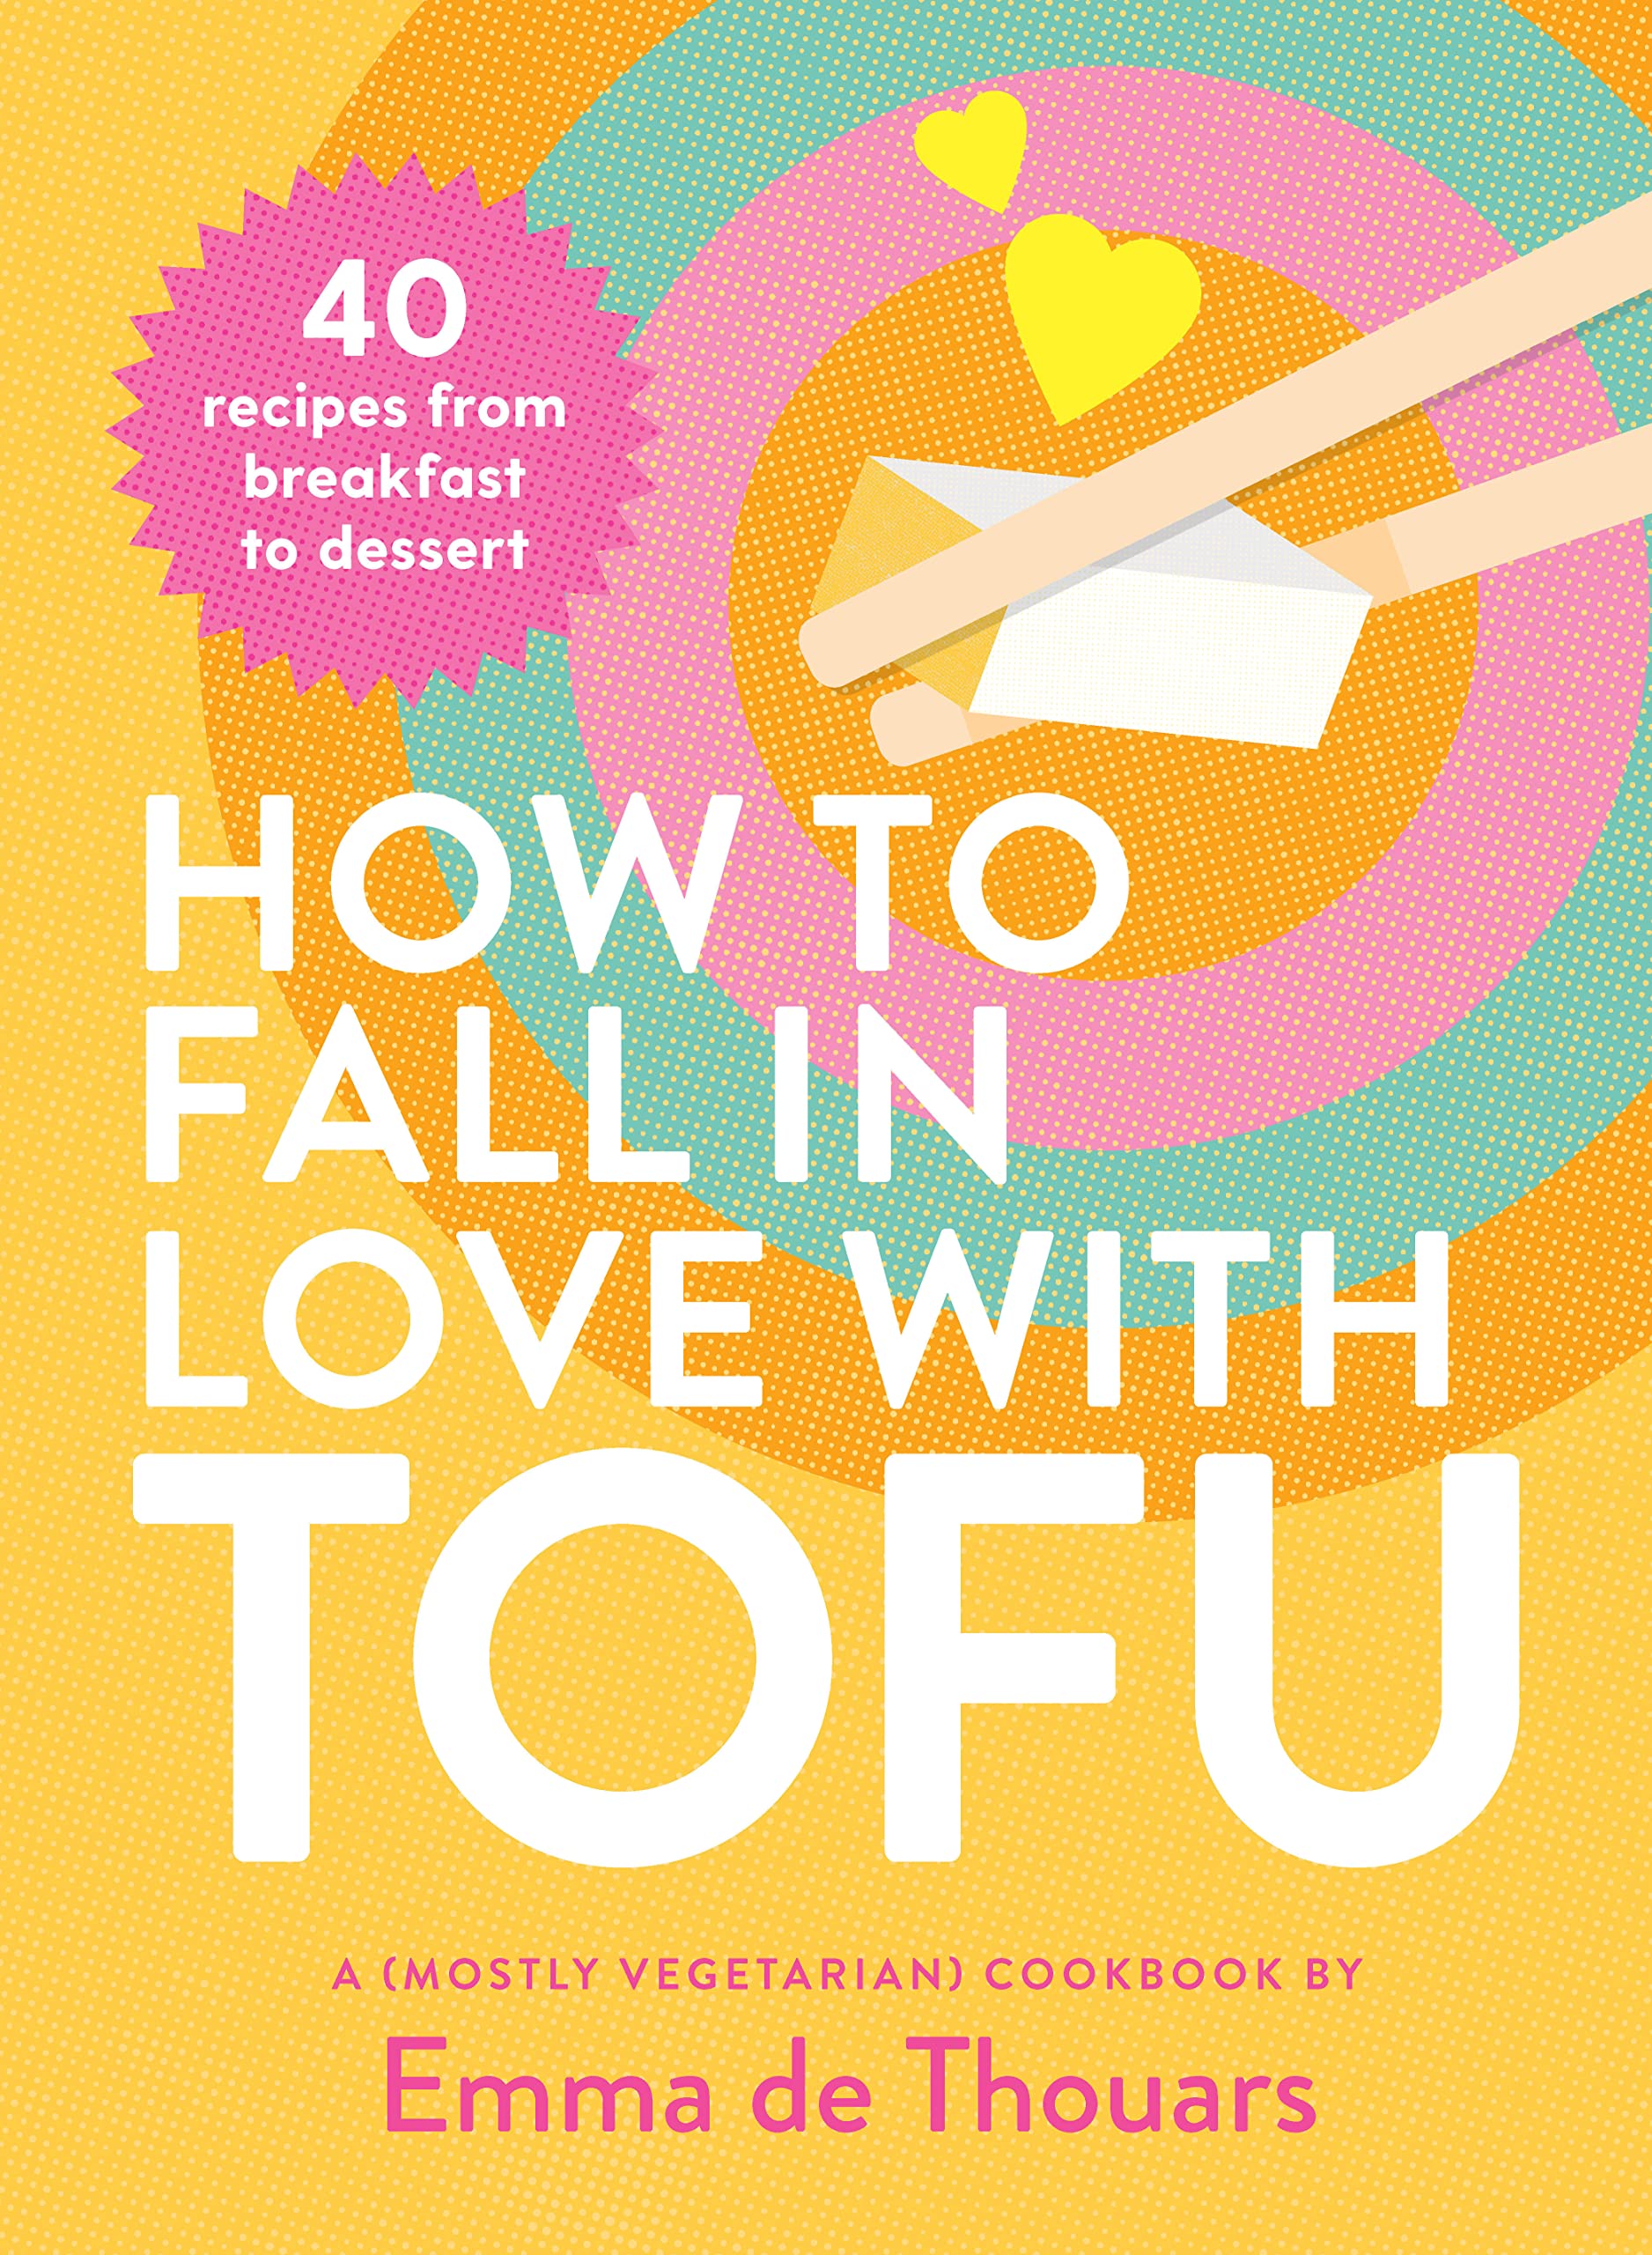 How to Fall in Love with Tofu: 40 Recipes from Breakfast to Dessert (Emma de Thouars)